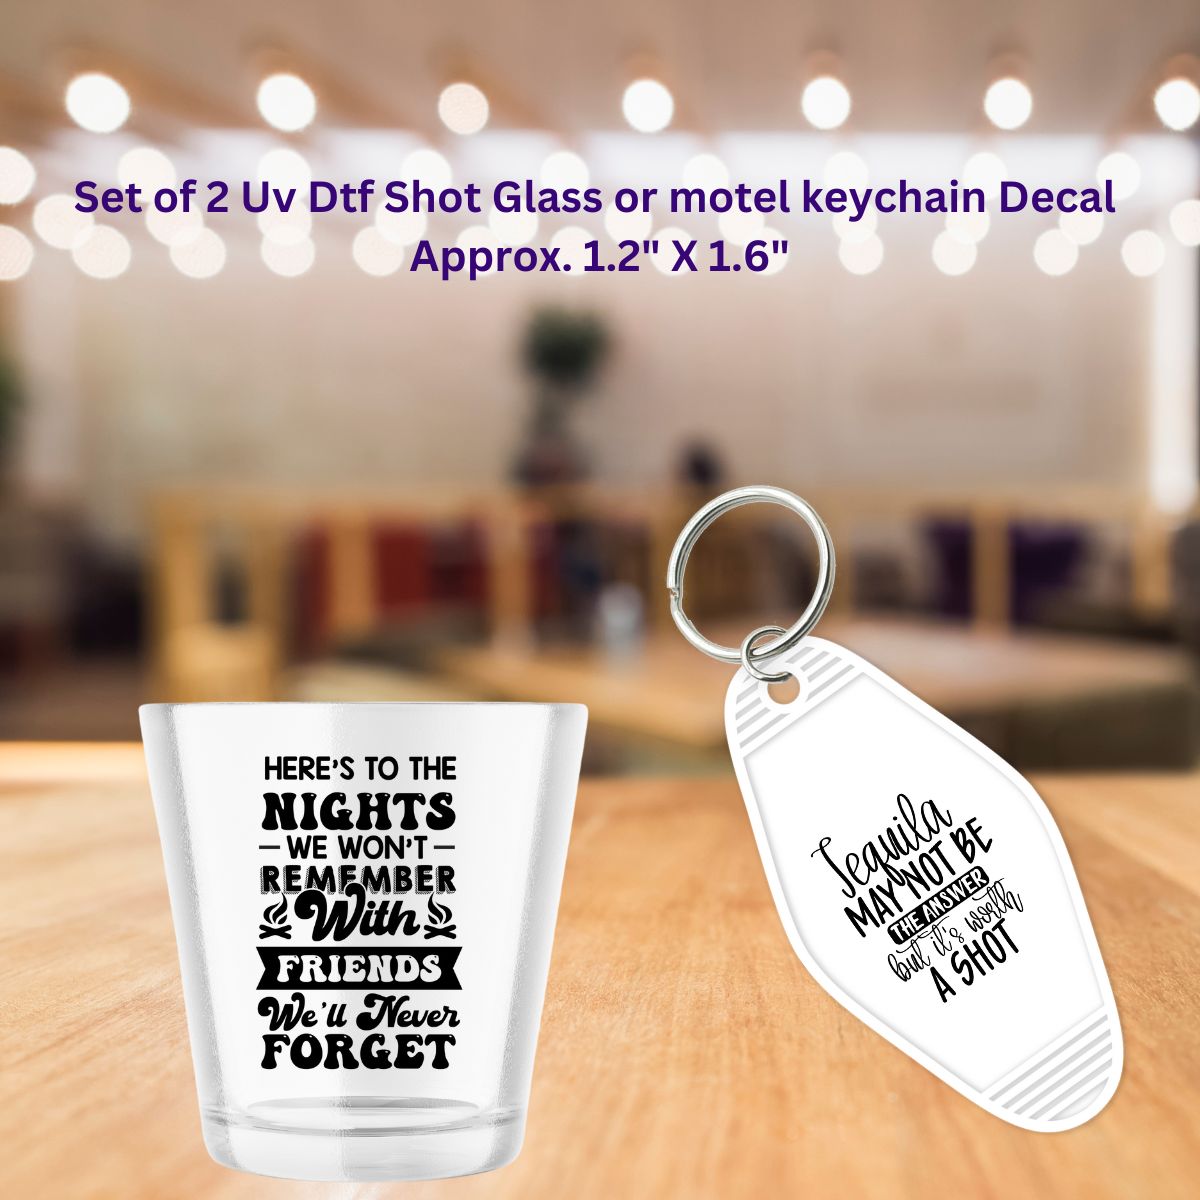 Set of 2 Uv Dtf Shot Glass or Motel Key Chain Decals Here's to the nights & Tequila Worth A Shot